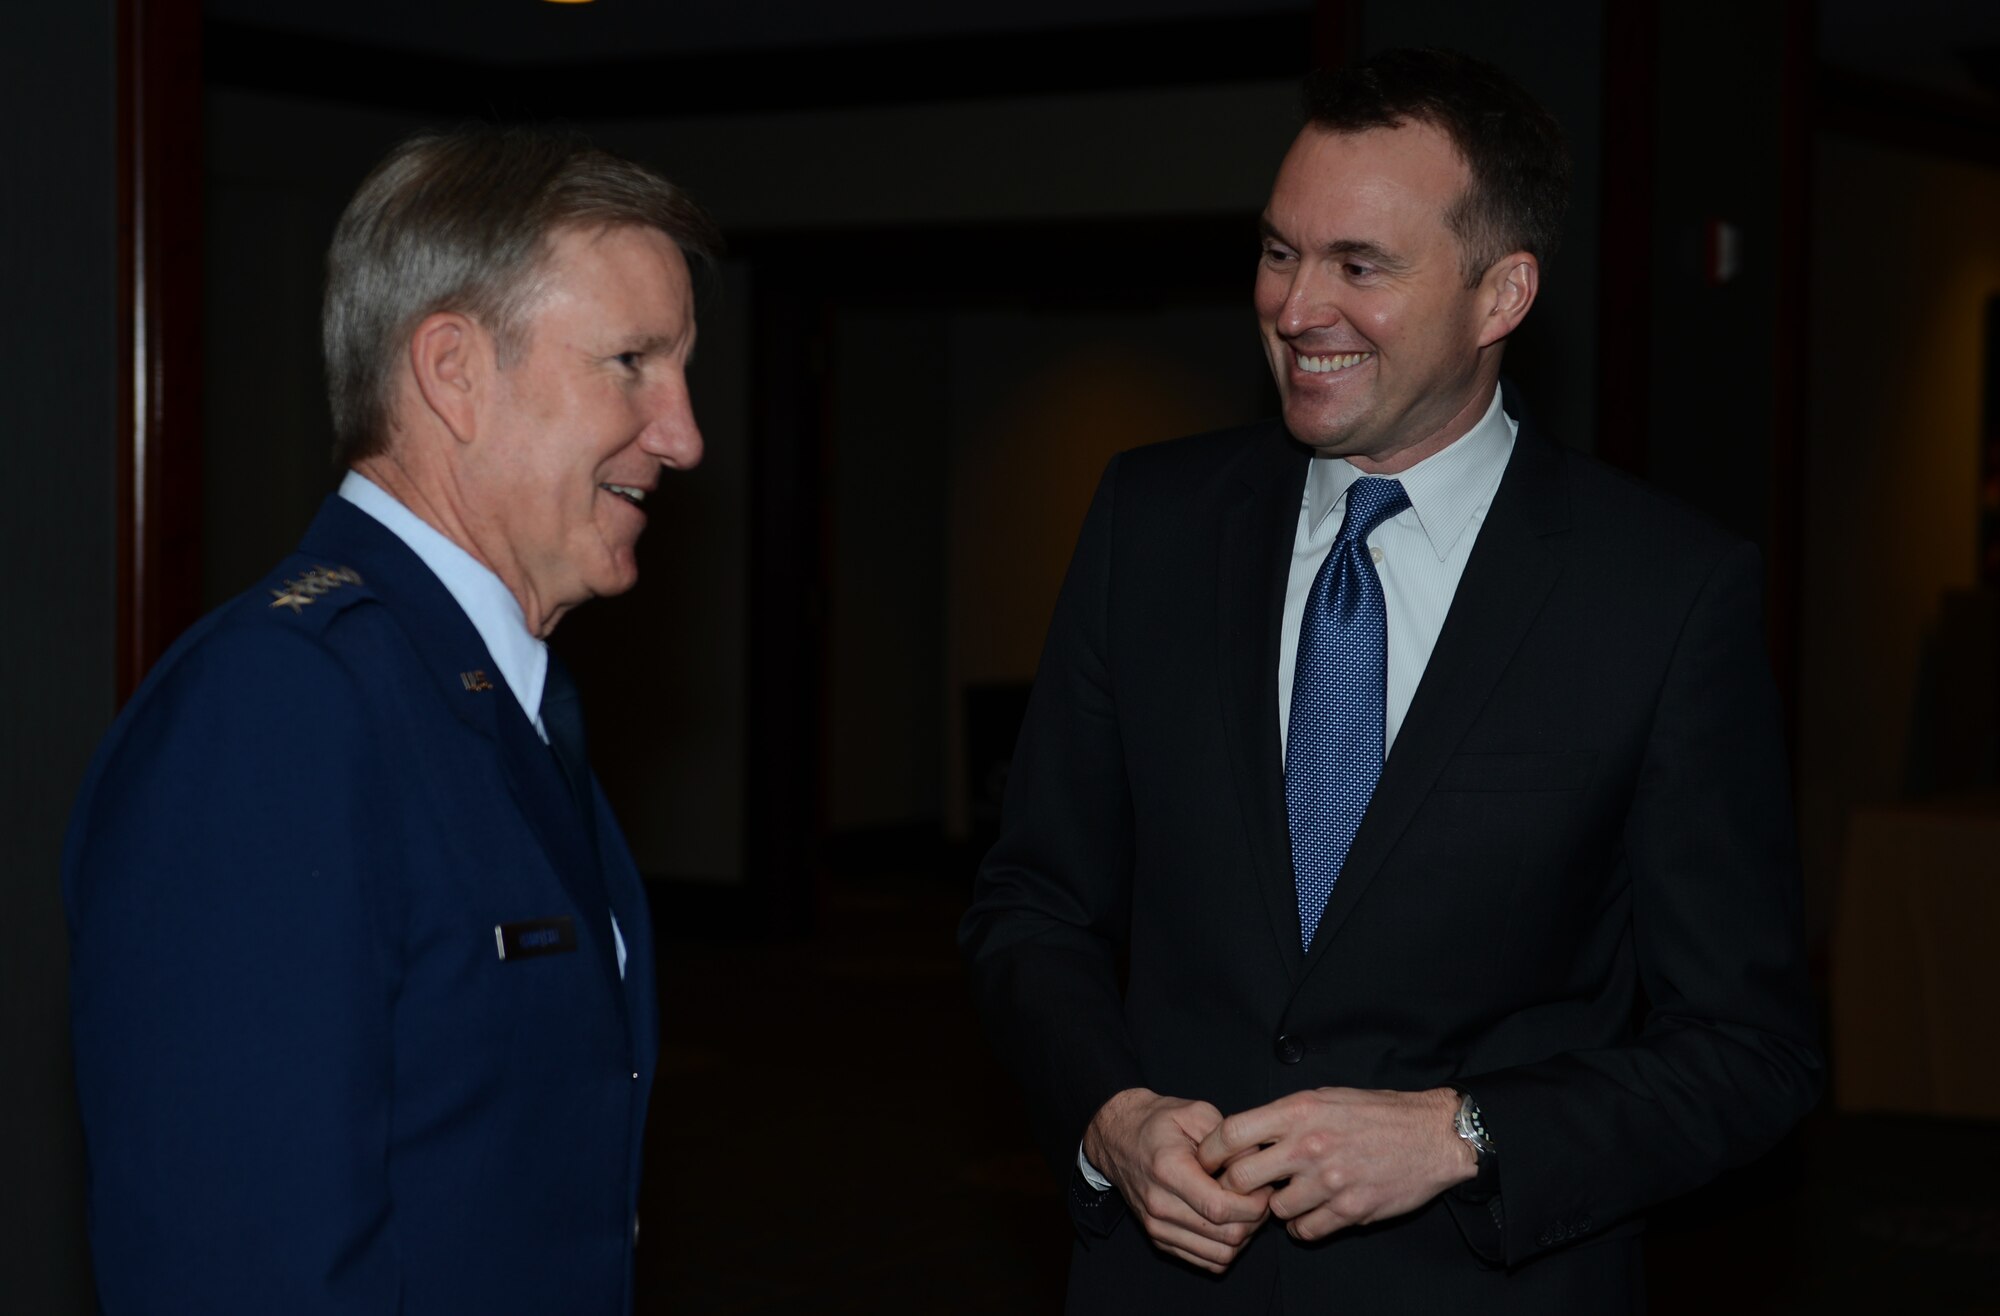 Acting Secretary of the Air Force Eric Fanning (right) speaks with Gen. Hawk Carlisle, Pacific Air Forces commander(left) before the beginning of events Nov 22, 2013, at at the Air Force Association Pacific Air & Space Symposium, Los Angeles, Calif. Fanning spoke on the state of the force and the Air Force’s position in space and cyberspace. Carlisle is the commander of the Pacific Air Forces.